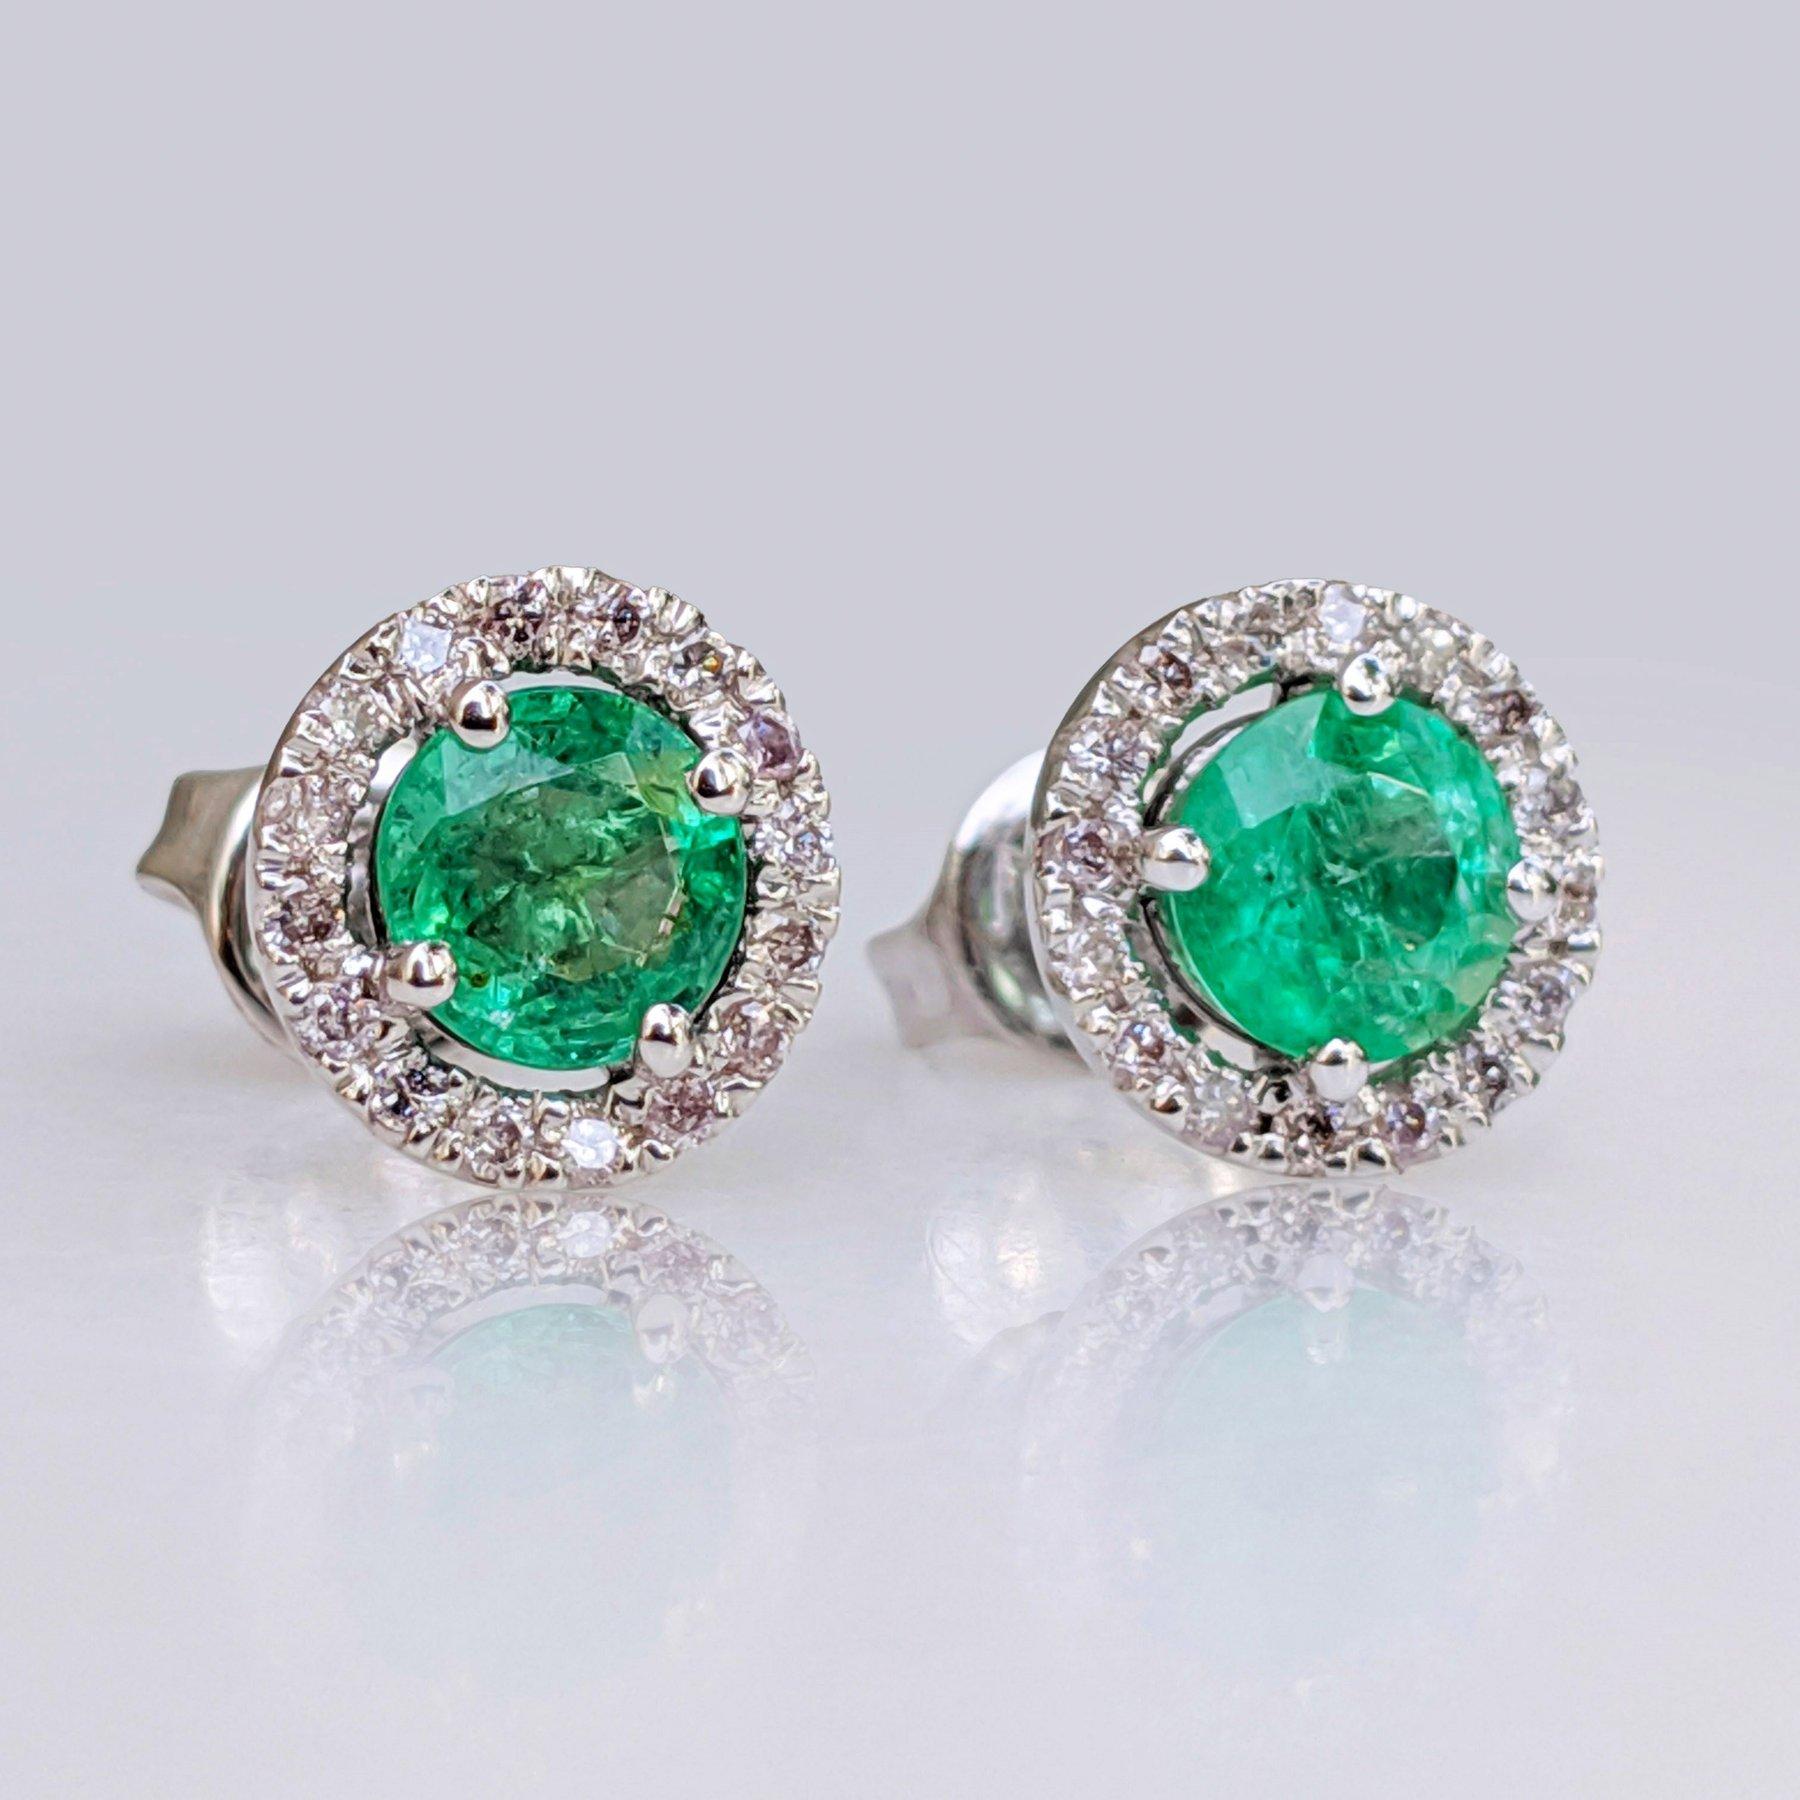 Round Cut $1 NO RESERVE!  1.15 Carat Emerald & 0.25 Ct Diamonds 14 Kt. White gold Earrings